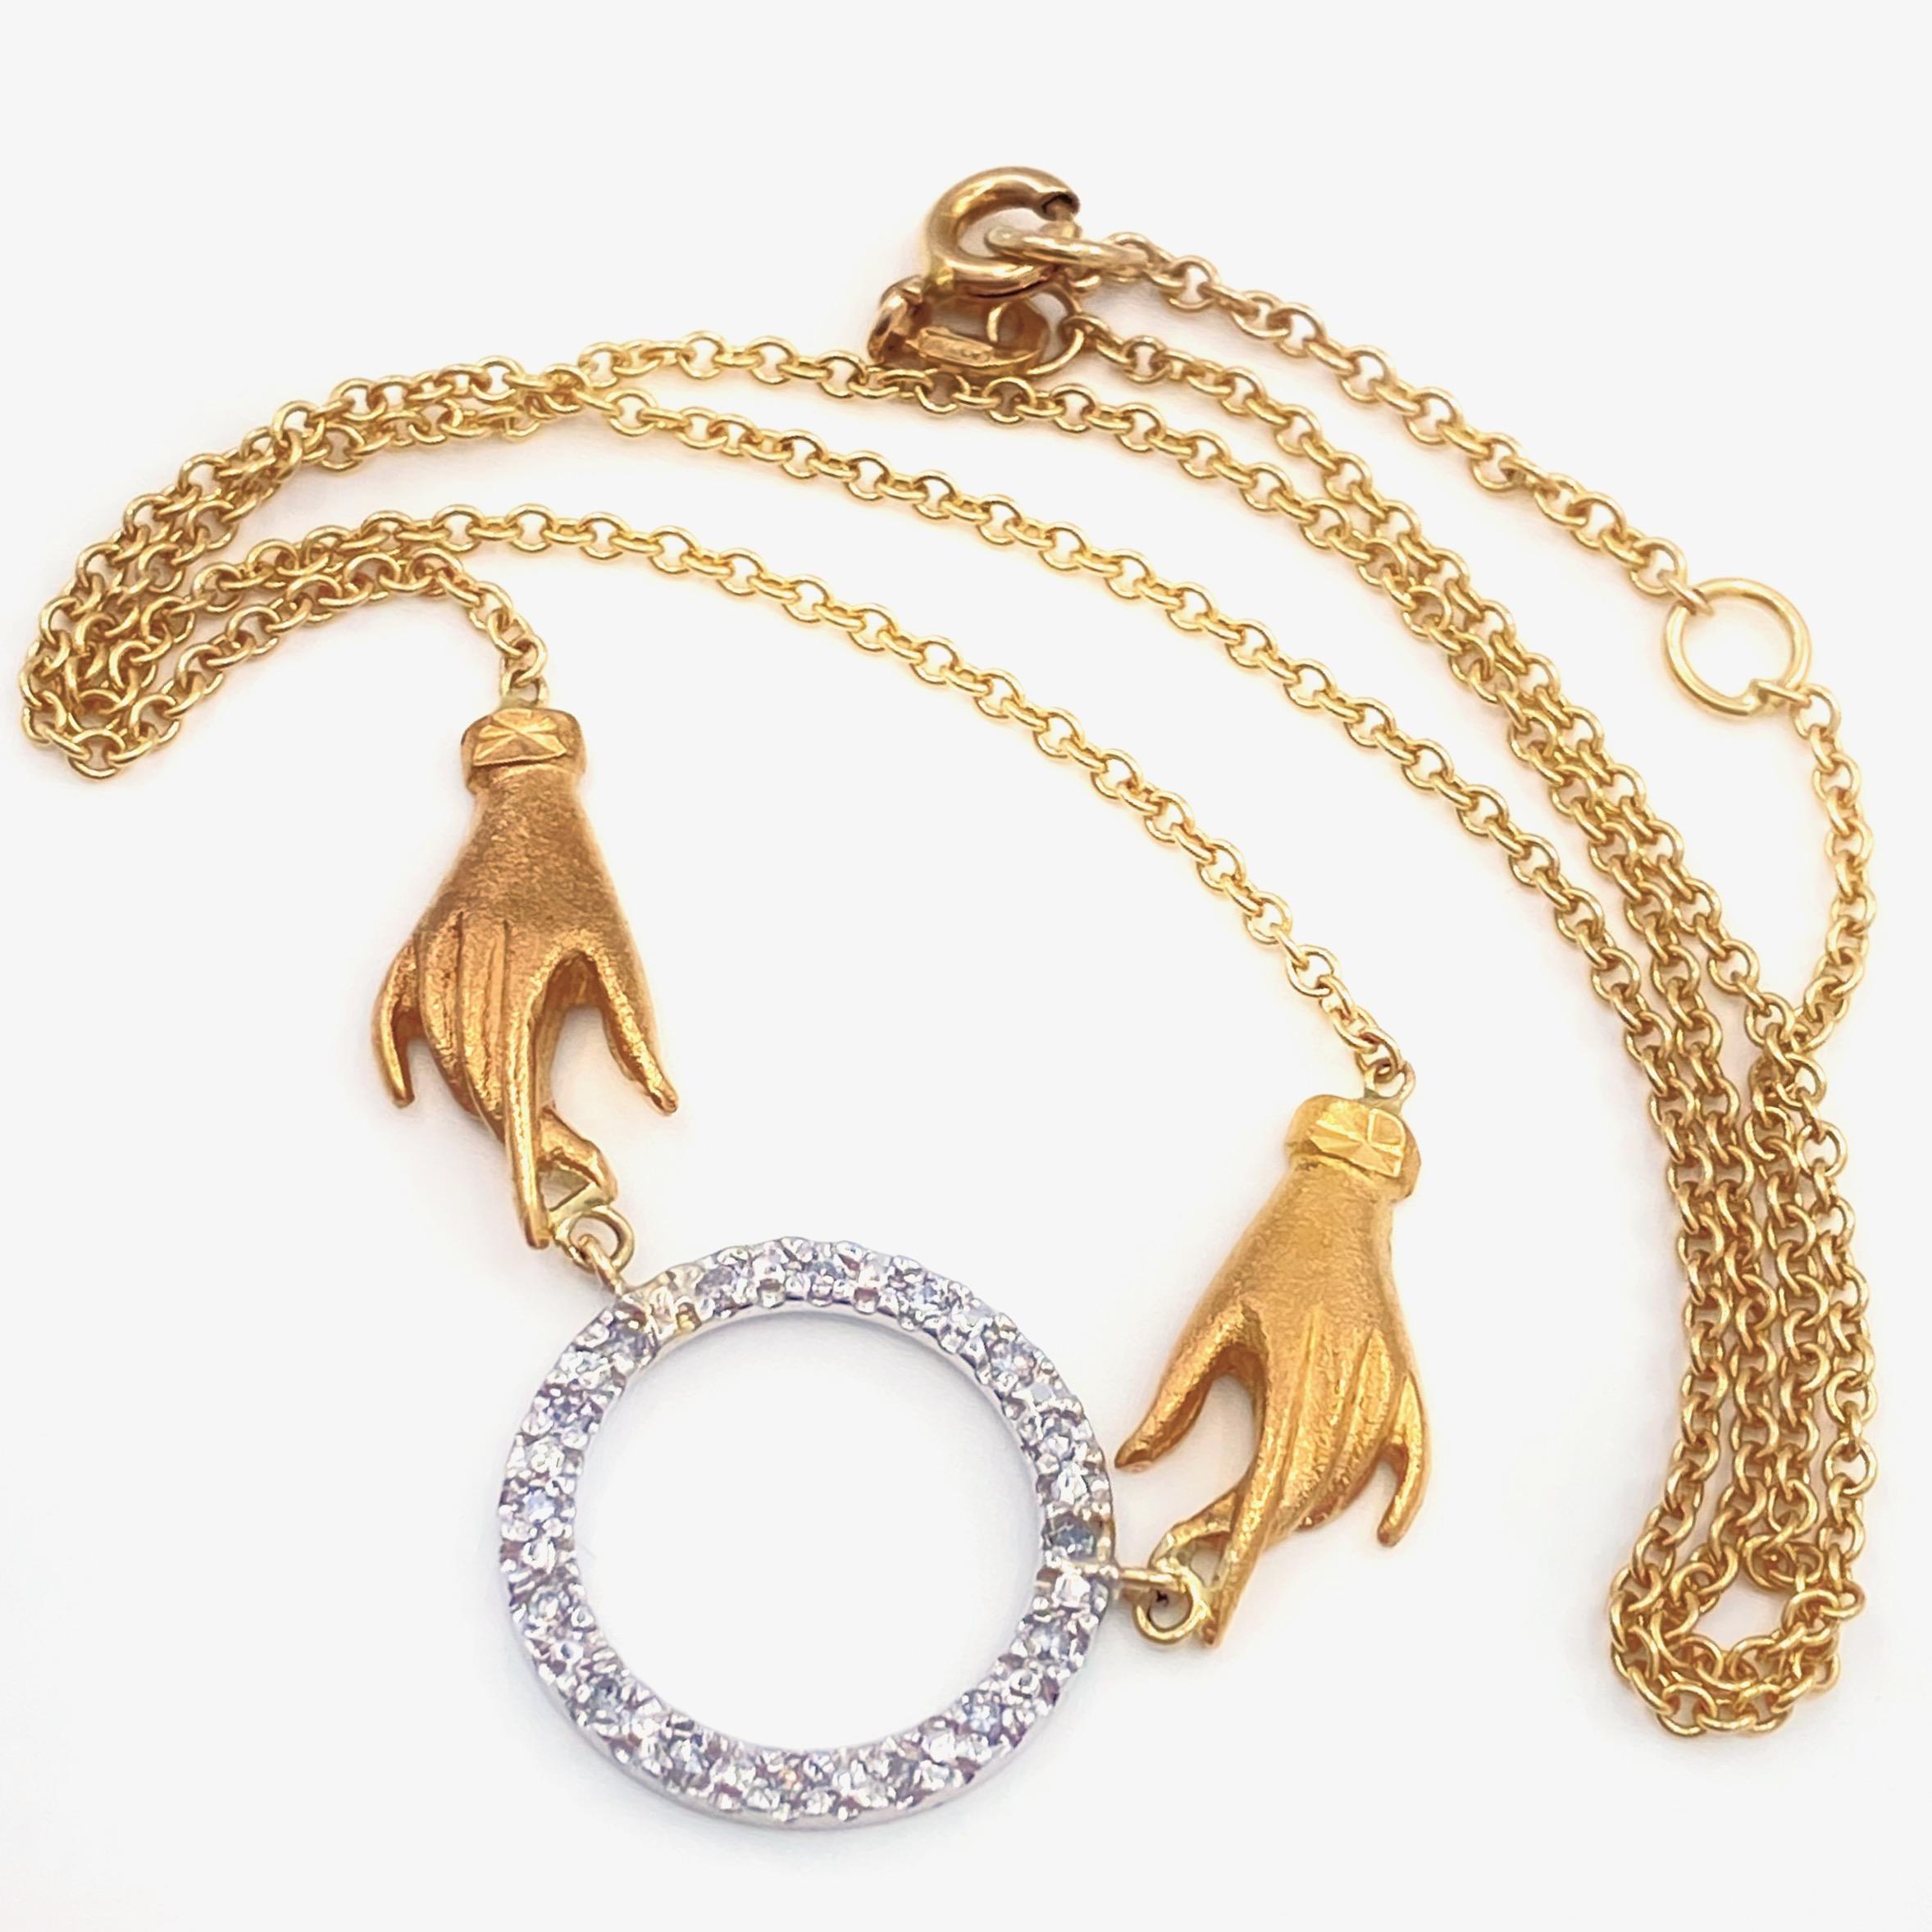 This one-of-a-kind assembled piece was cooked up by Eytan Brandes using vintage components.  

The 18 karat yellow gold hands, with their cuffed gloves and frosty finish, are two of about a dozen hand charms acquired in a kooky mixed lot from a